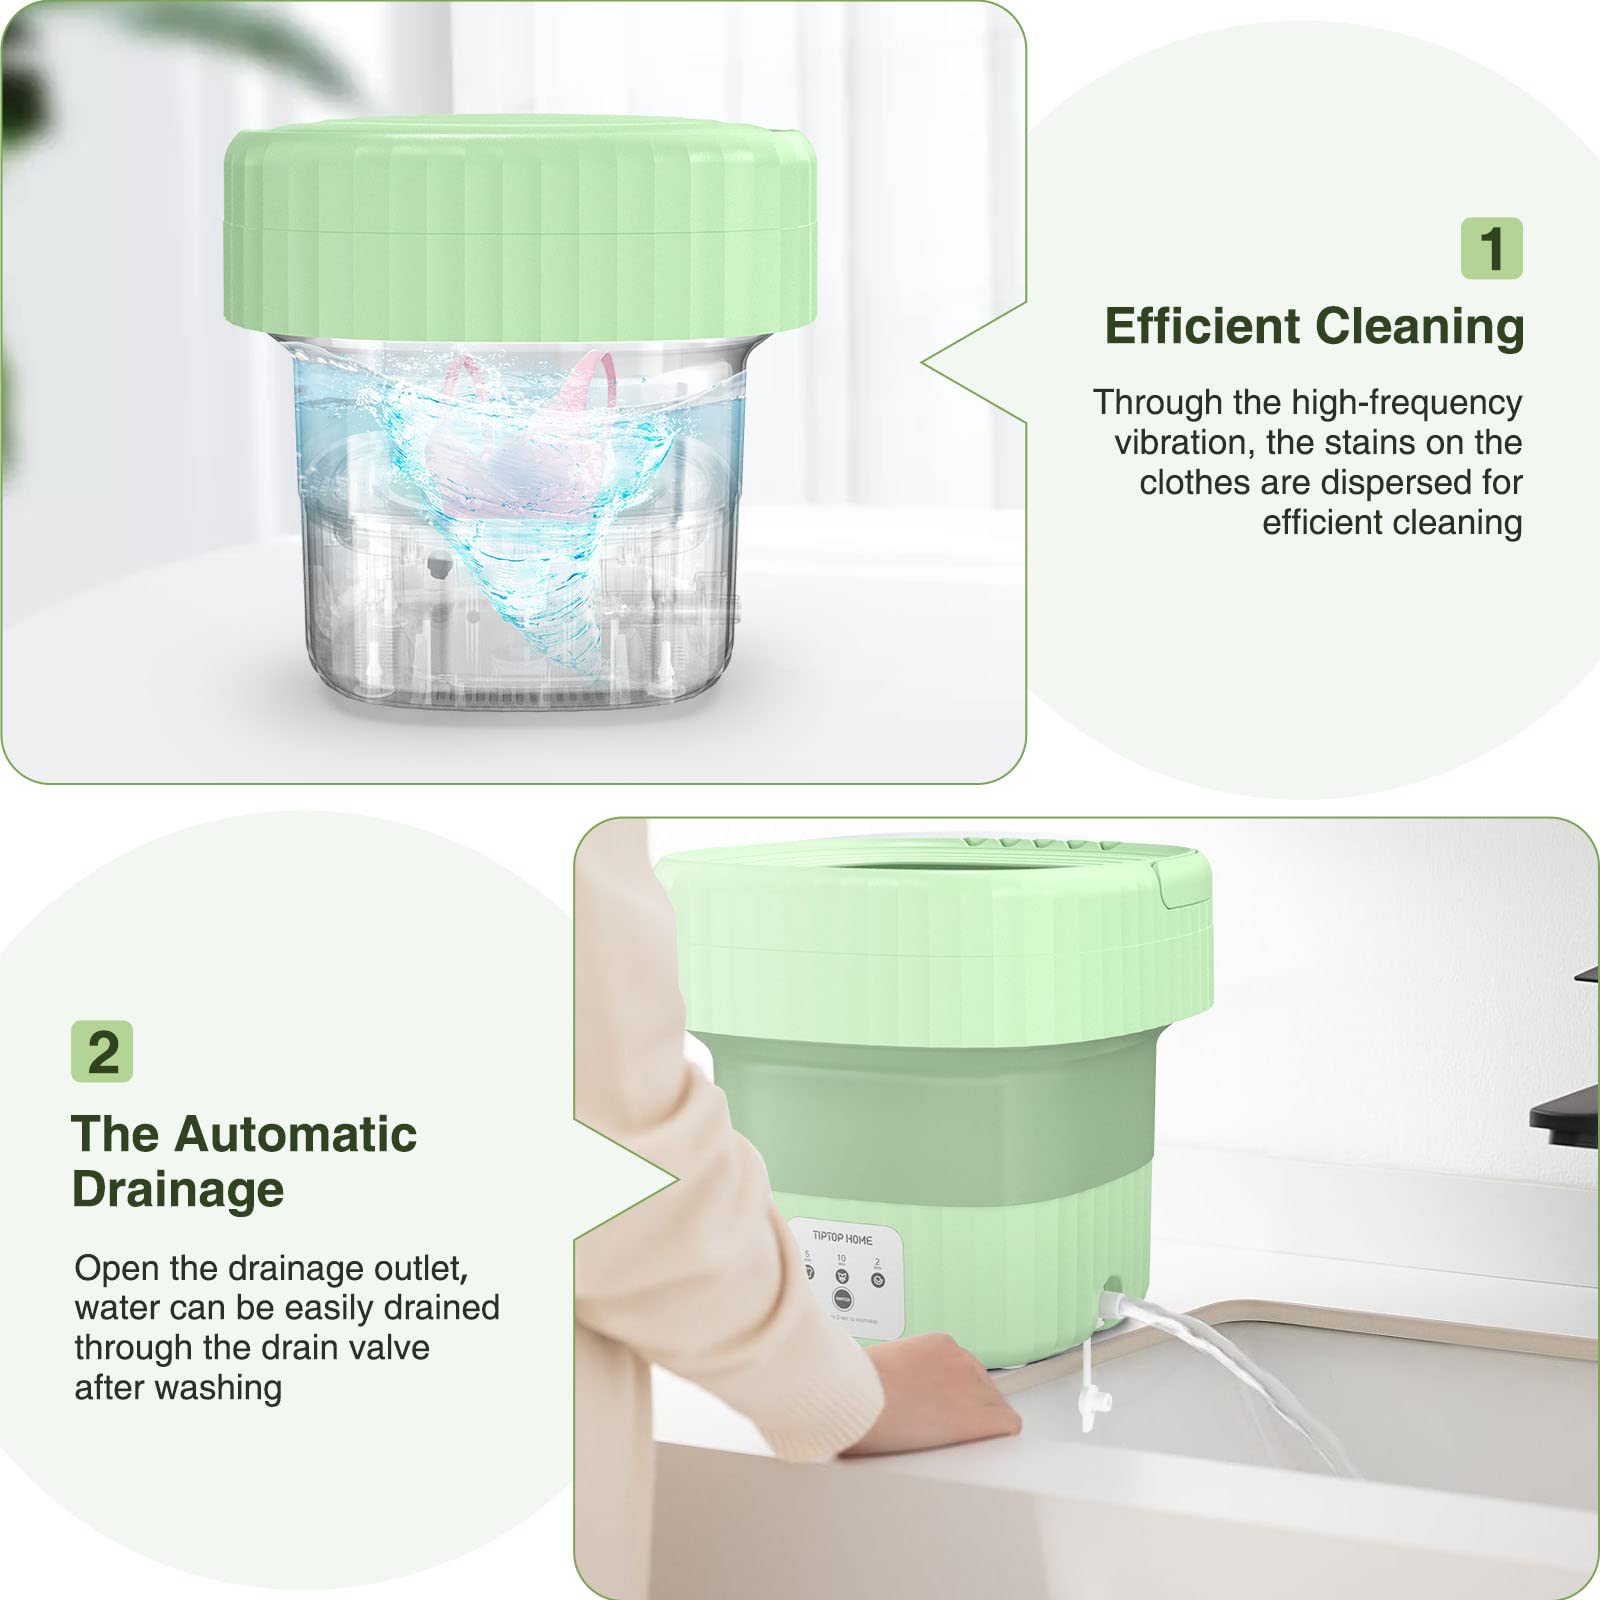 Portable Washing Machine, Mini Washing Machine Foldable Laundry Bucket,Portable Small Washer by for Socks Underwear or Small Items, Travel Business Trip or College Rooms